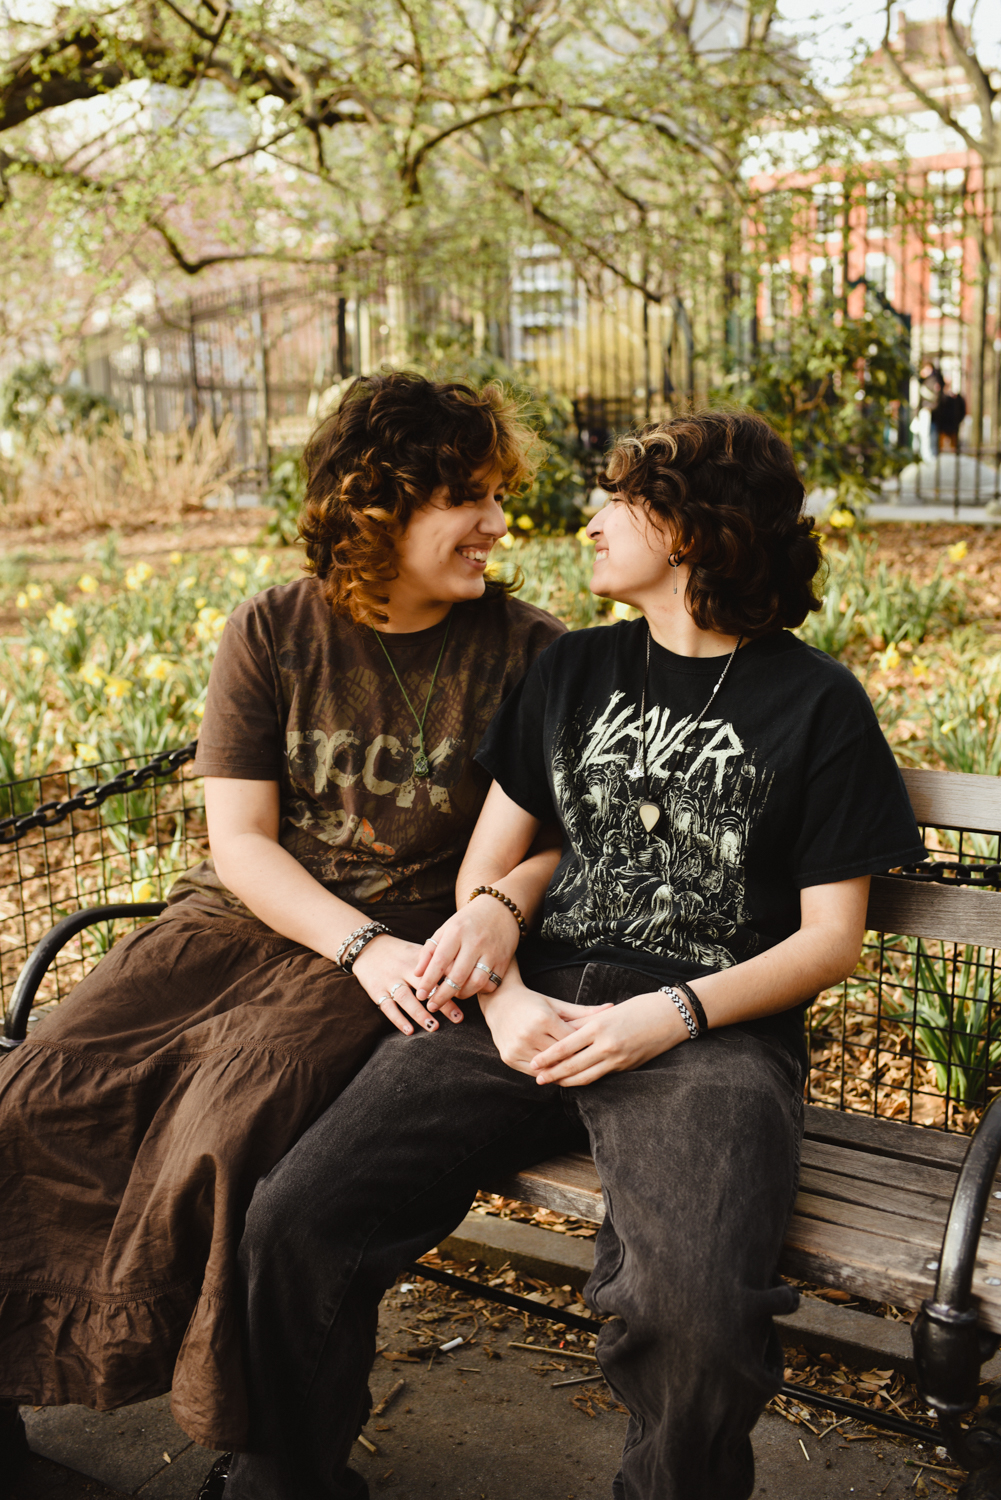 Gigi Portilla and Miche Fernandez sit together on a bench under a tree in Washington Square Park. They are looking at each other and laughing.